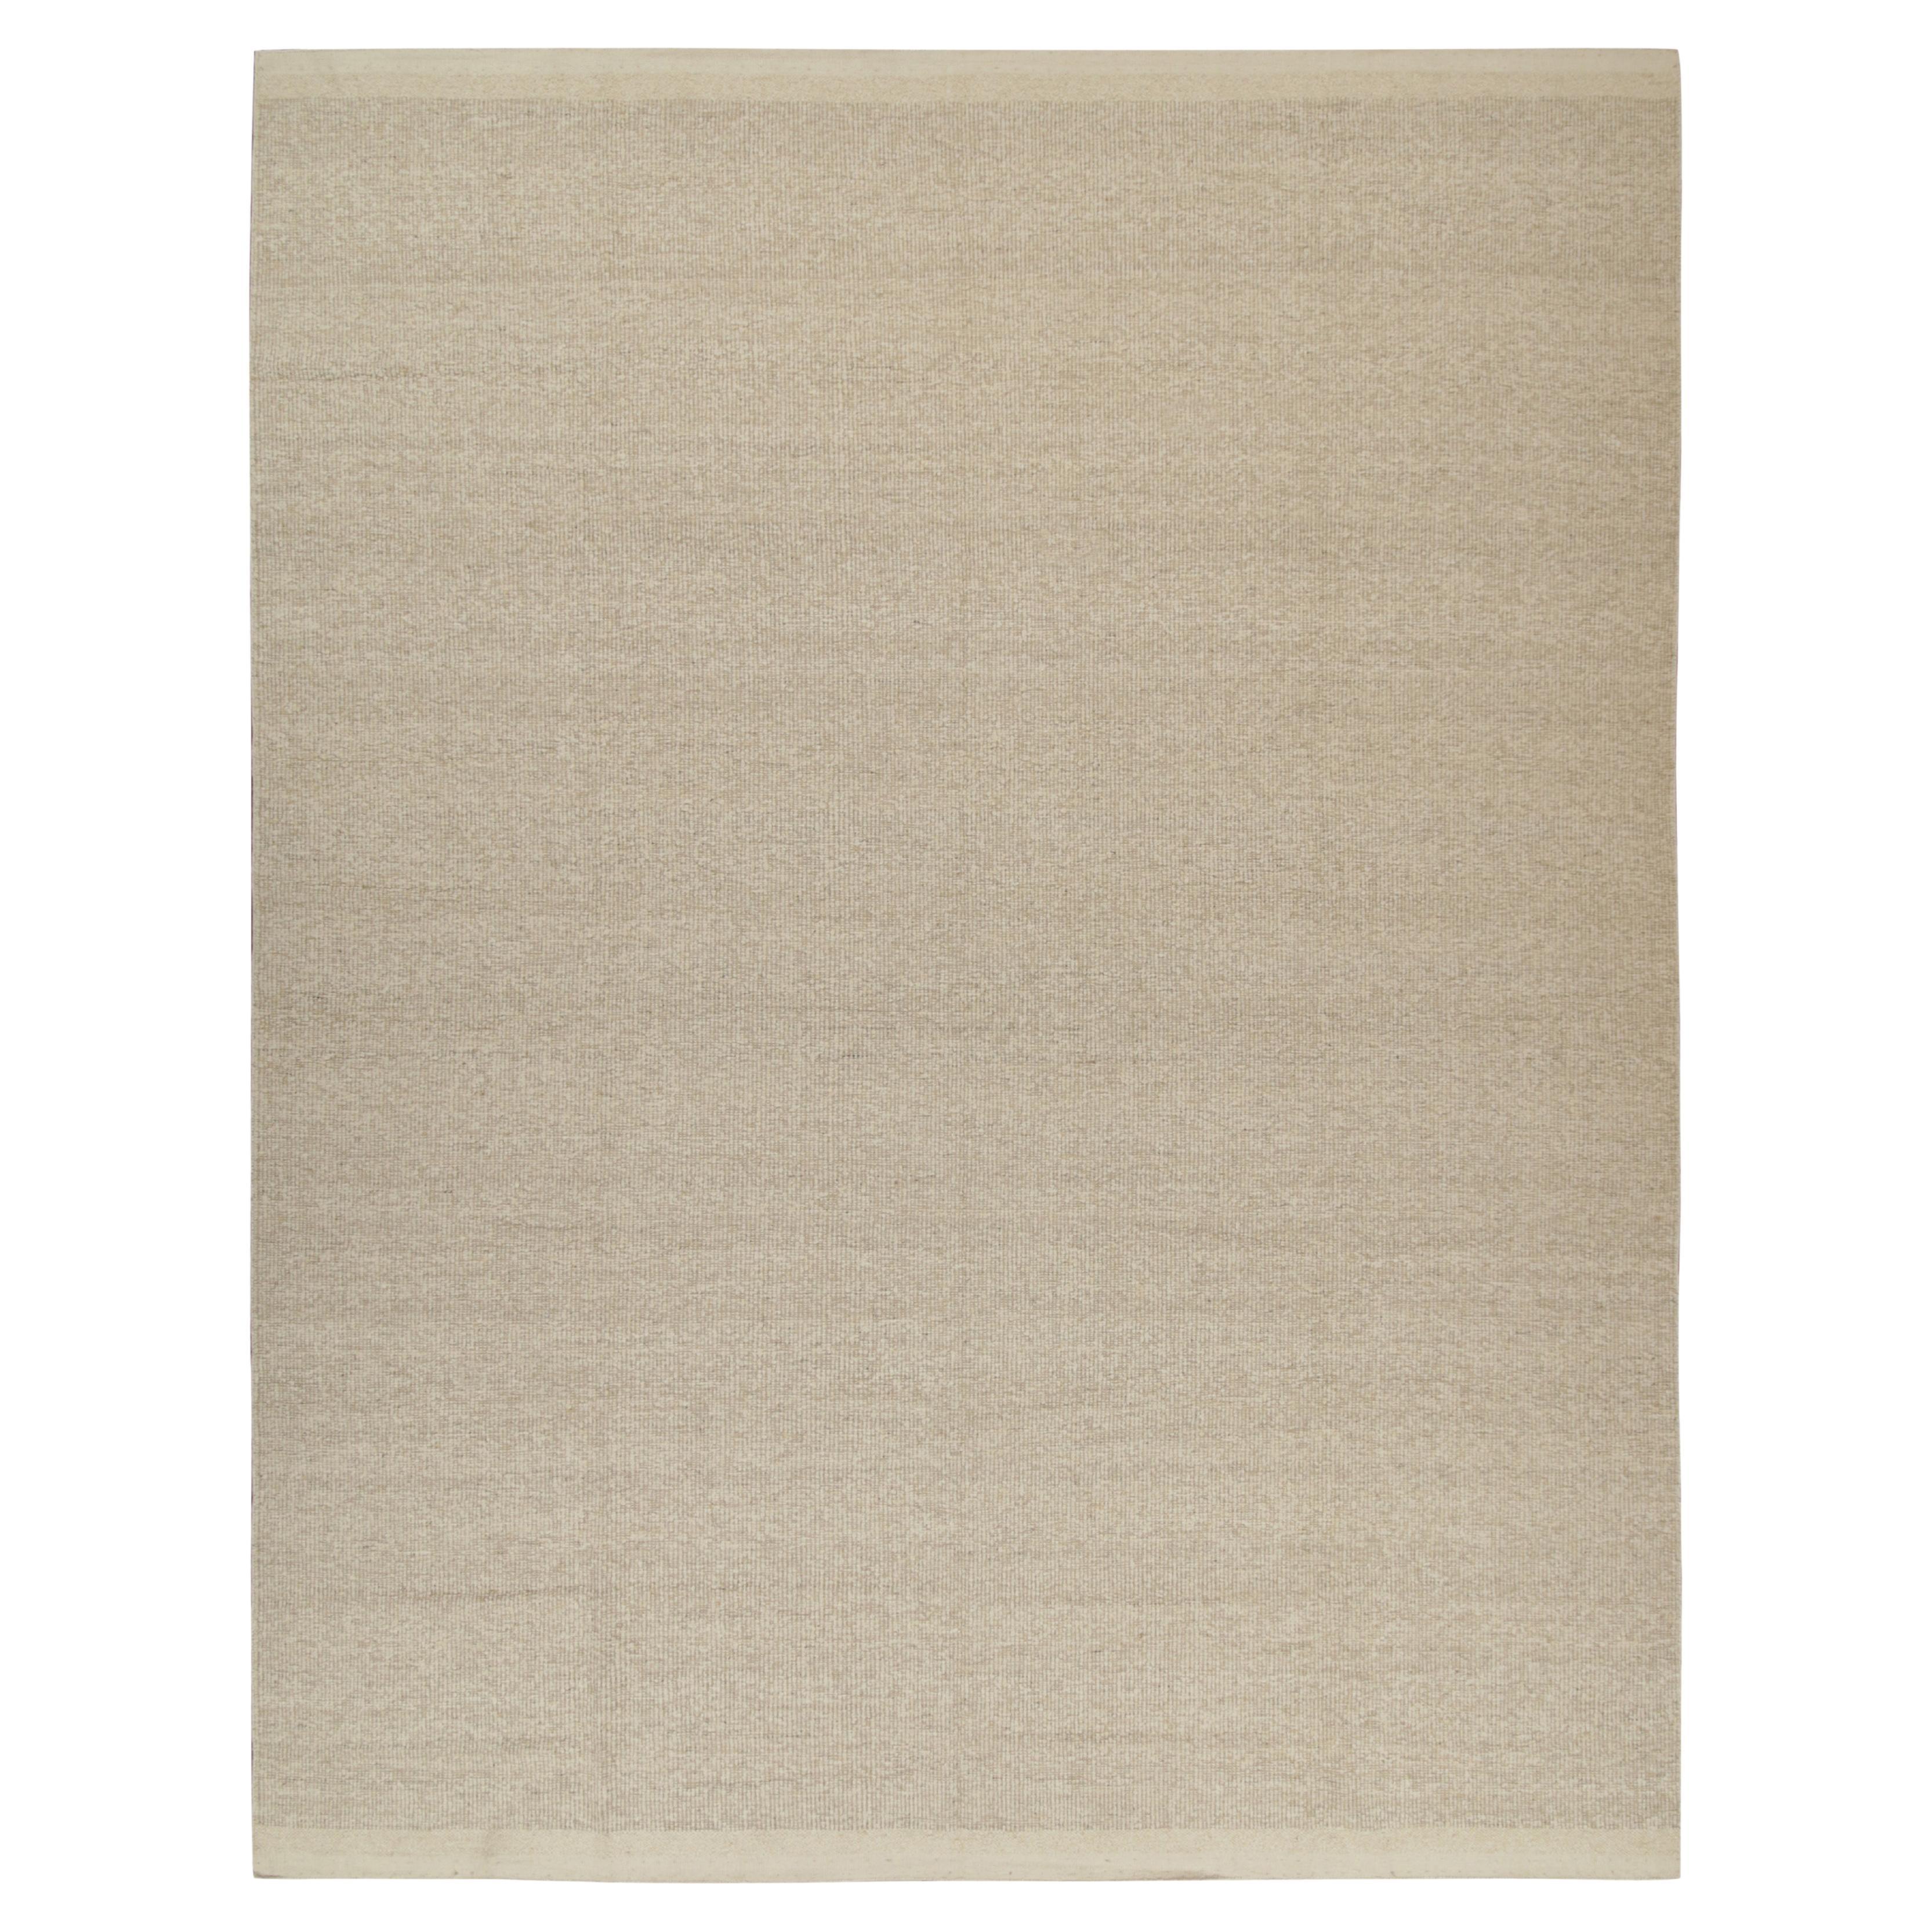 Rug & Kilim’s Contemporary Flat Weave in Solid Beige and White Boucle